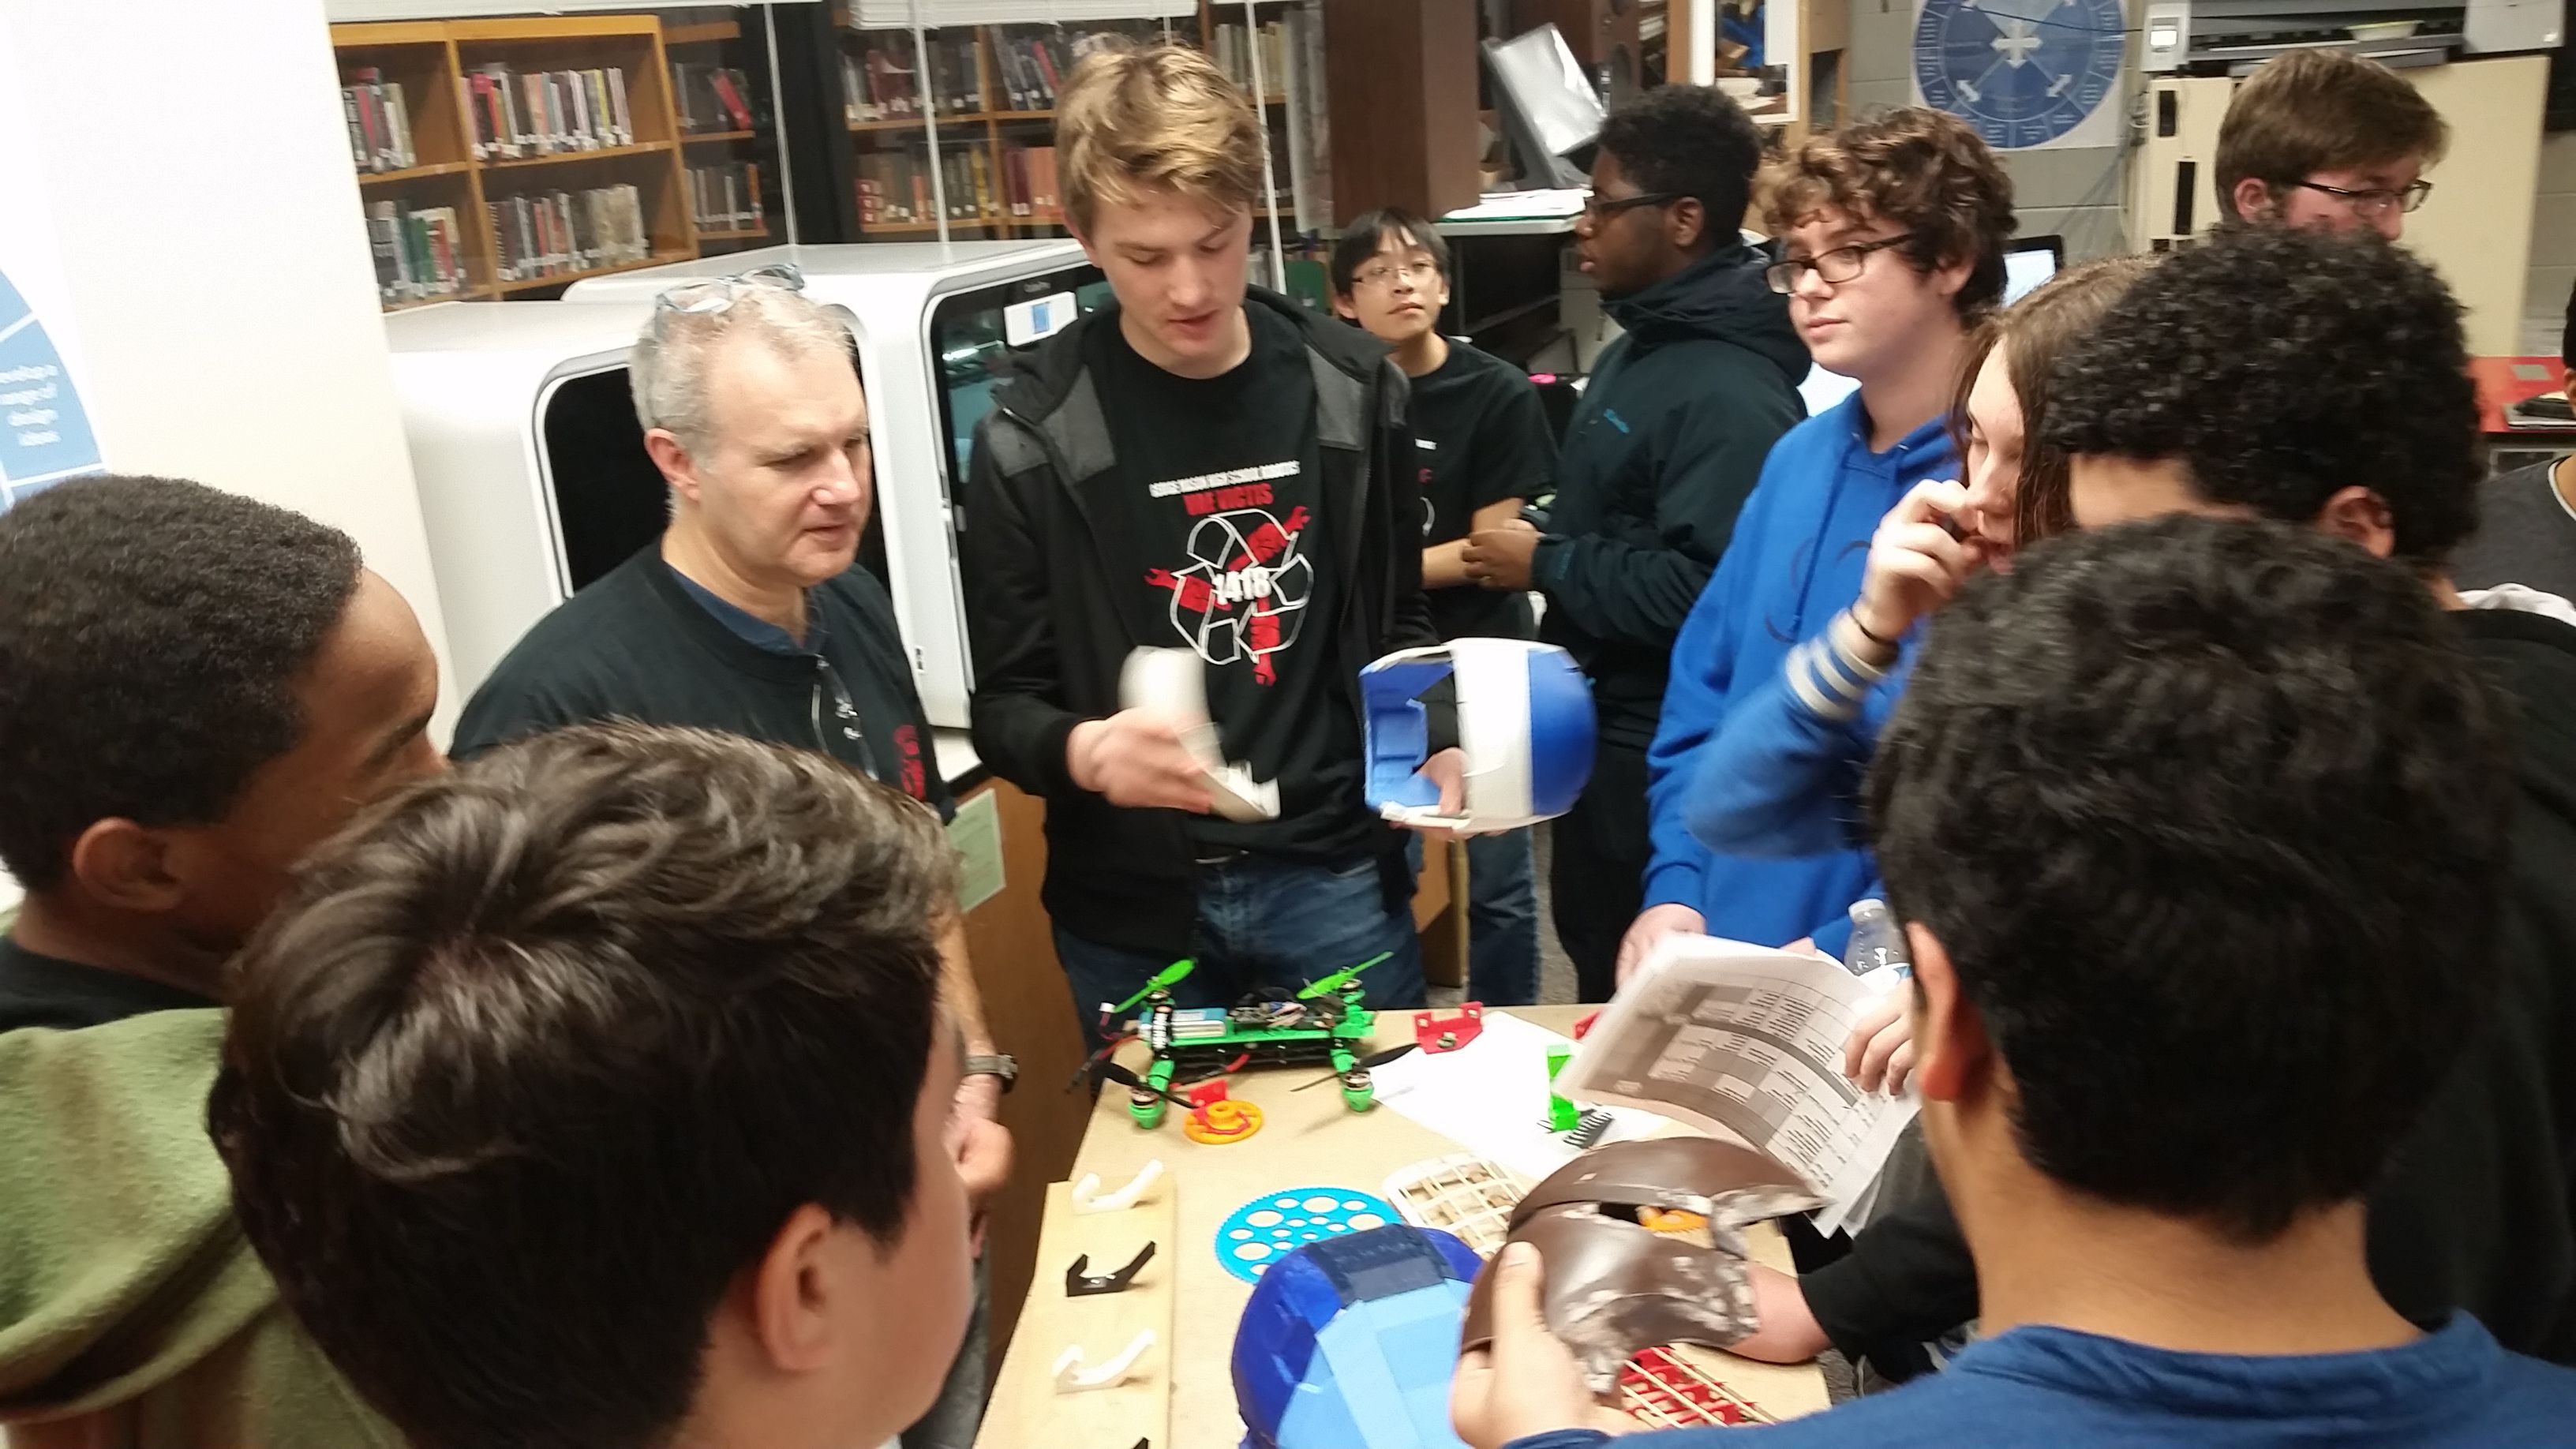 Students attending a 2015 workshop in the Makerspace.